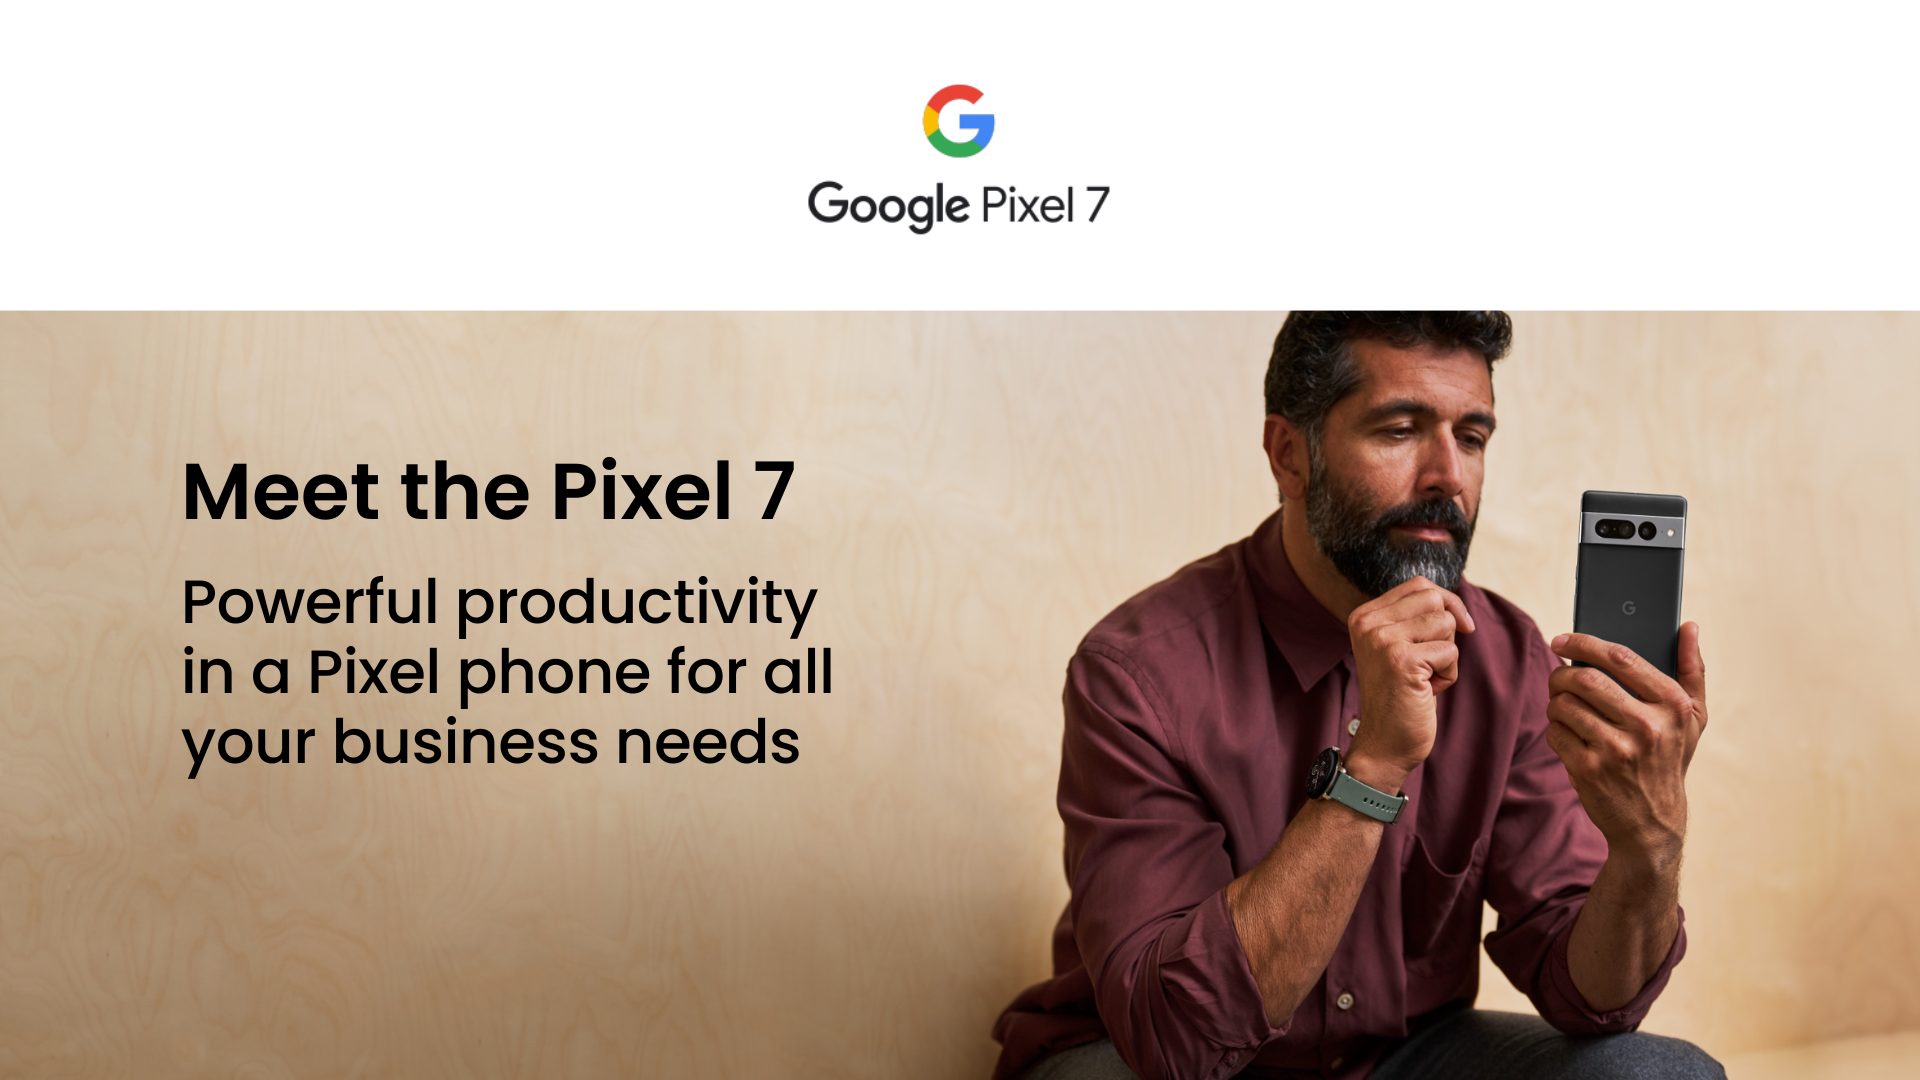 Google Pixel 7 – is it the most secure device on the market?